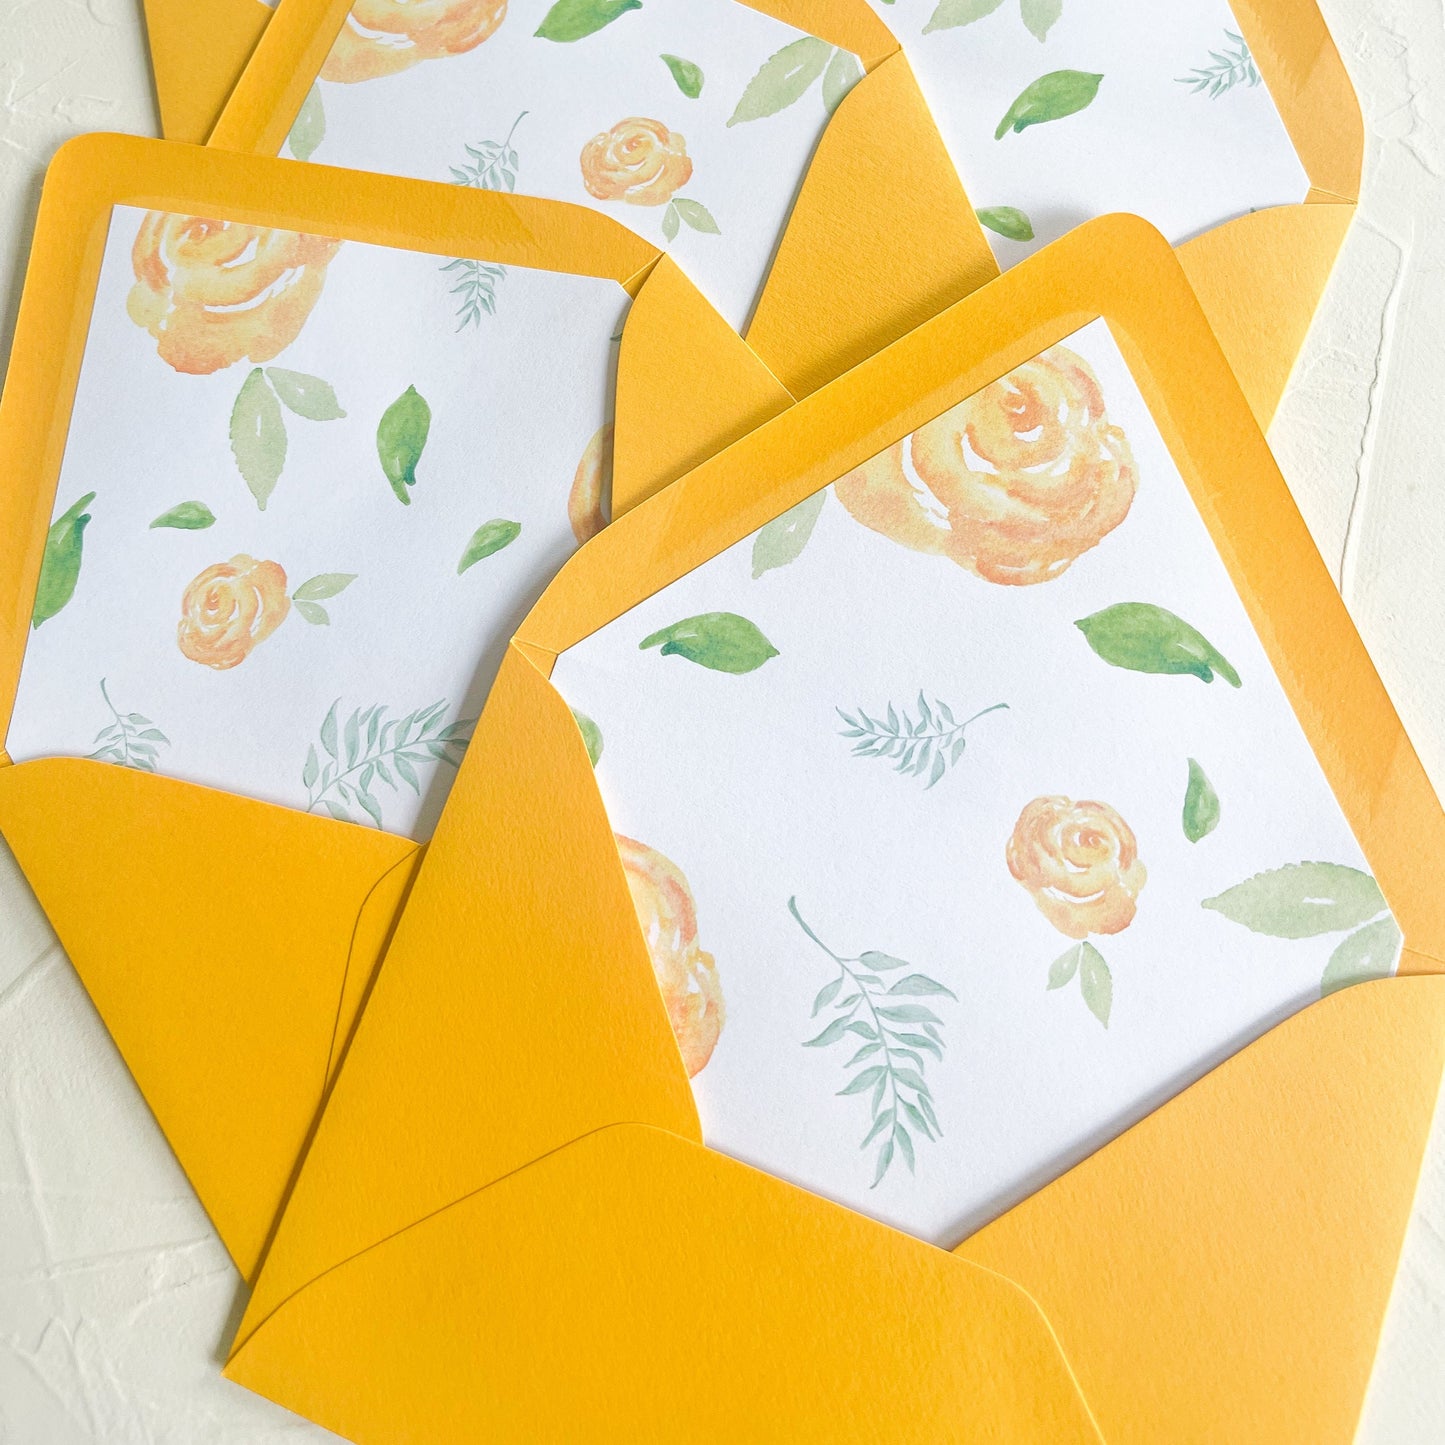 Yellow Rose of Texas Stationery Set, Set of 5 Notecards with Lined Envelopes